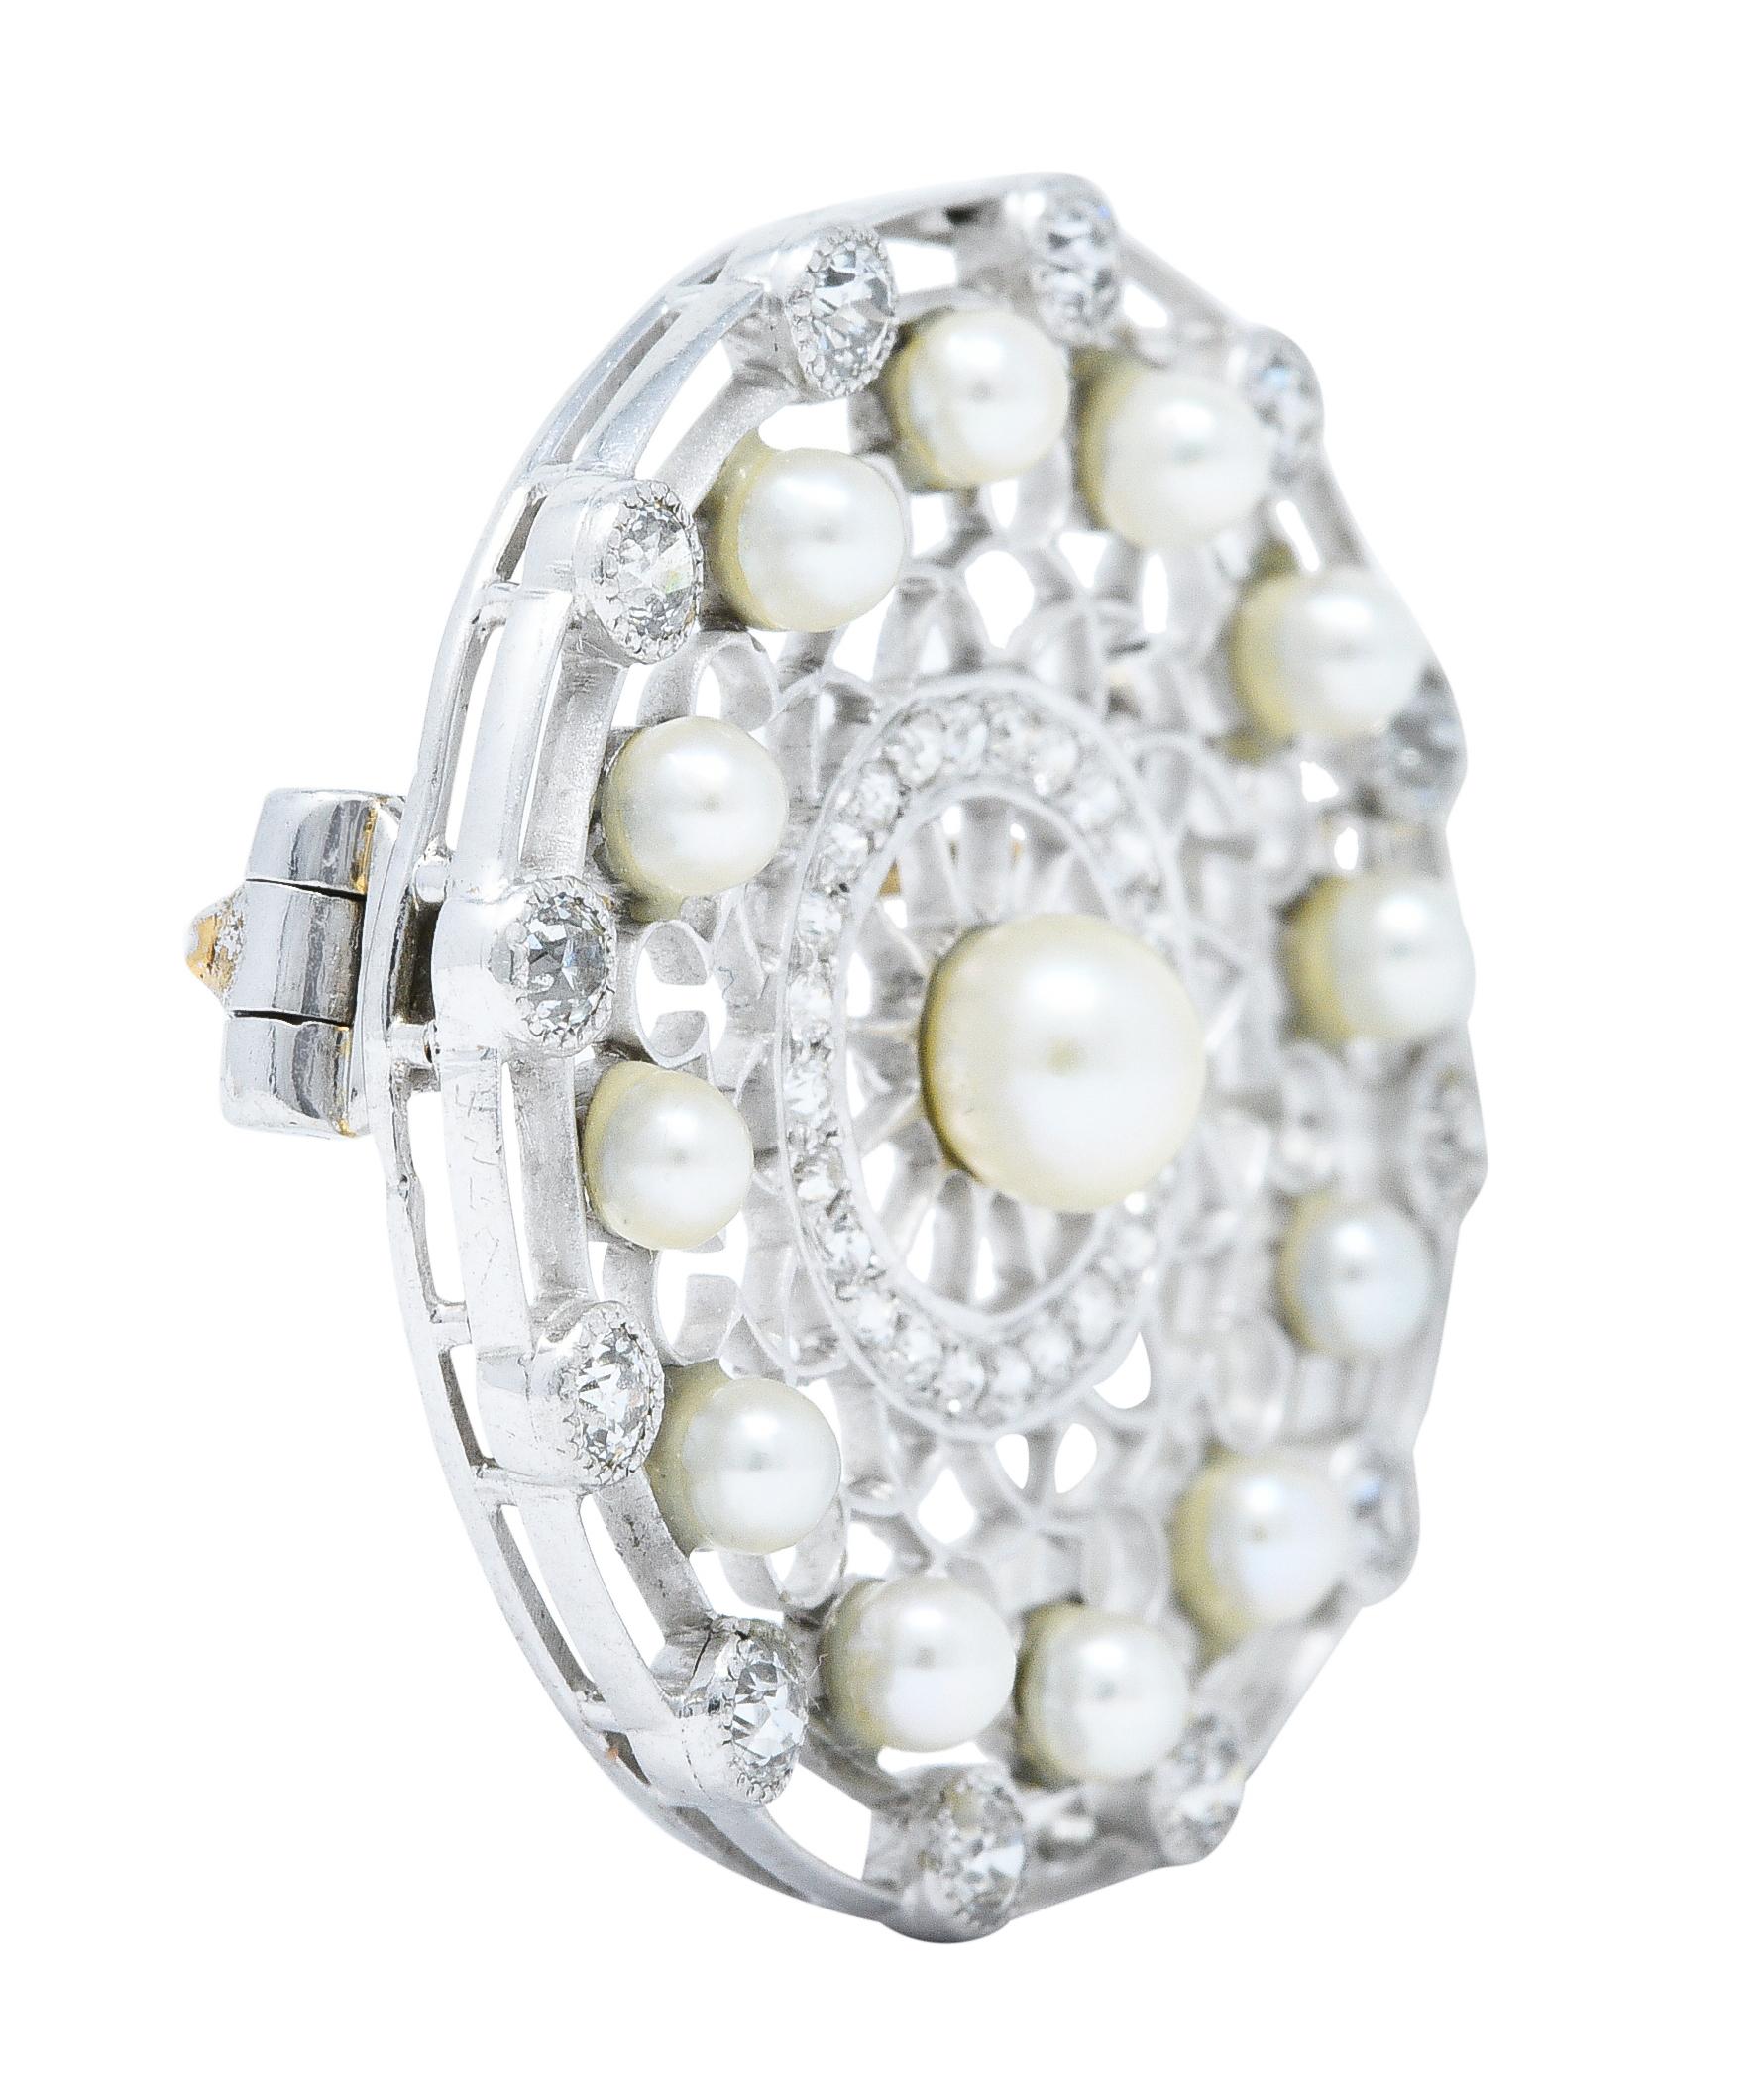 Circular brooch features a pierced trellis design and centers a 4.5 mm button pearl

Surrounded by a halo of 2.5 mm pearls - all are white to cream in color with very good luster

Accented by two concentric halos of old European cut